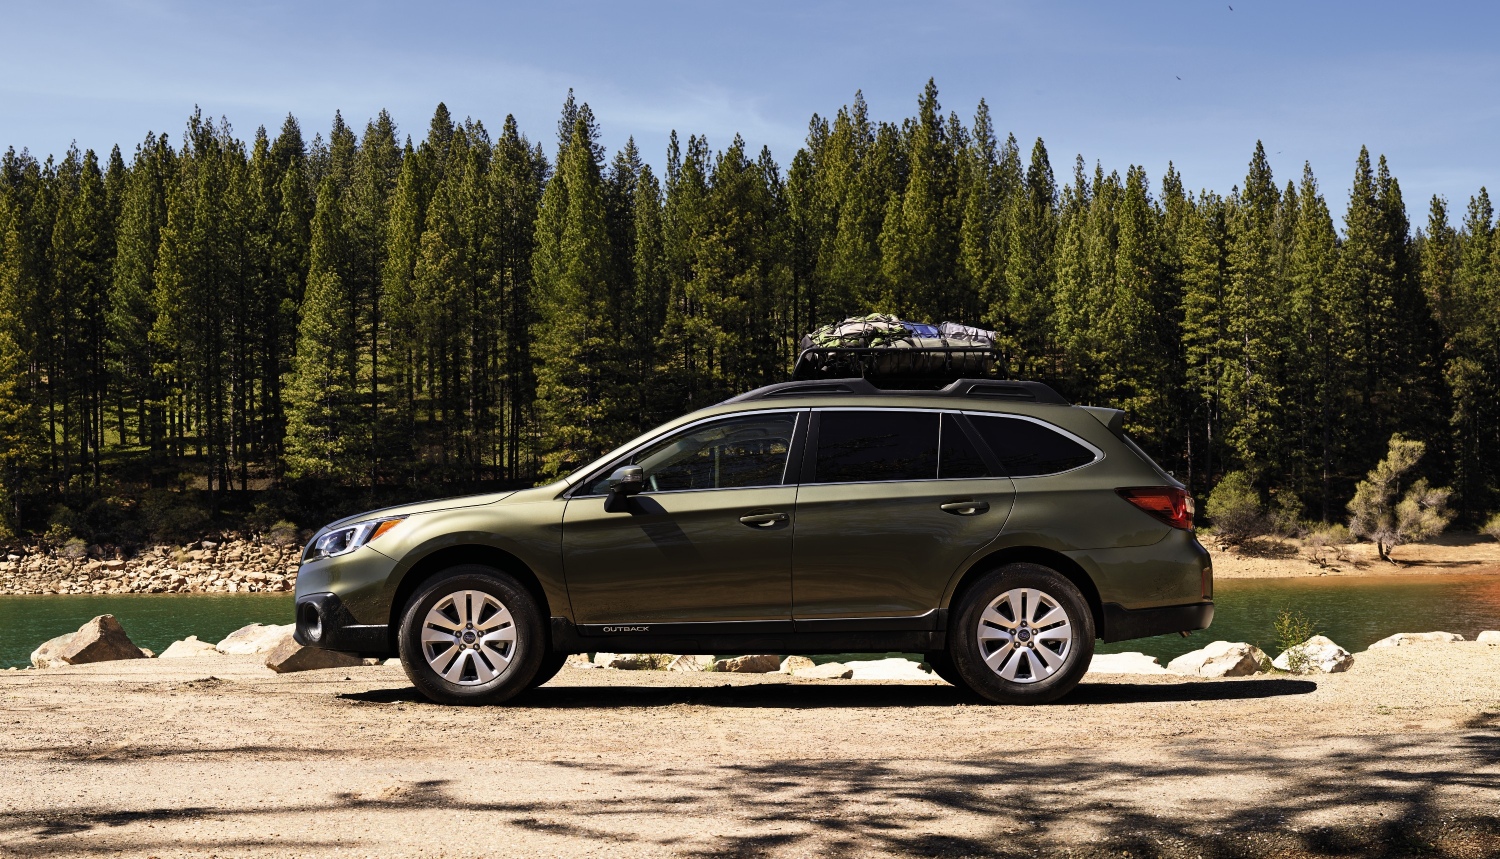 Safe and reliable SUV for teenagers include this Subaru Outback